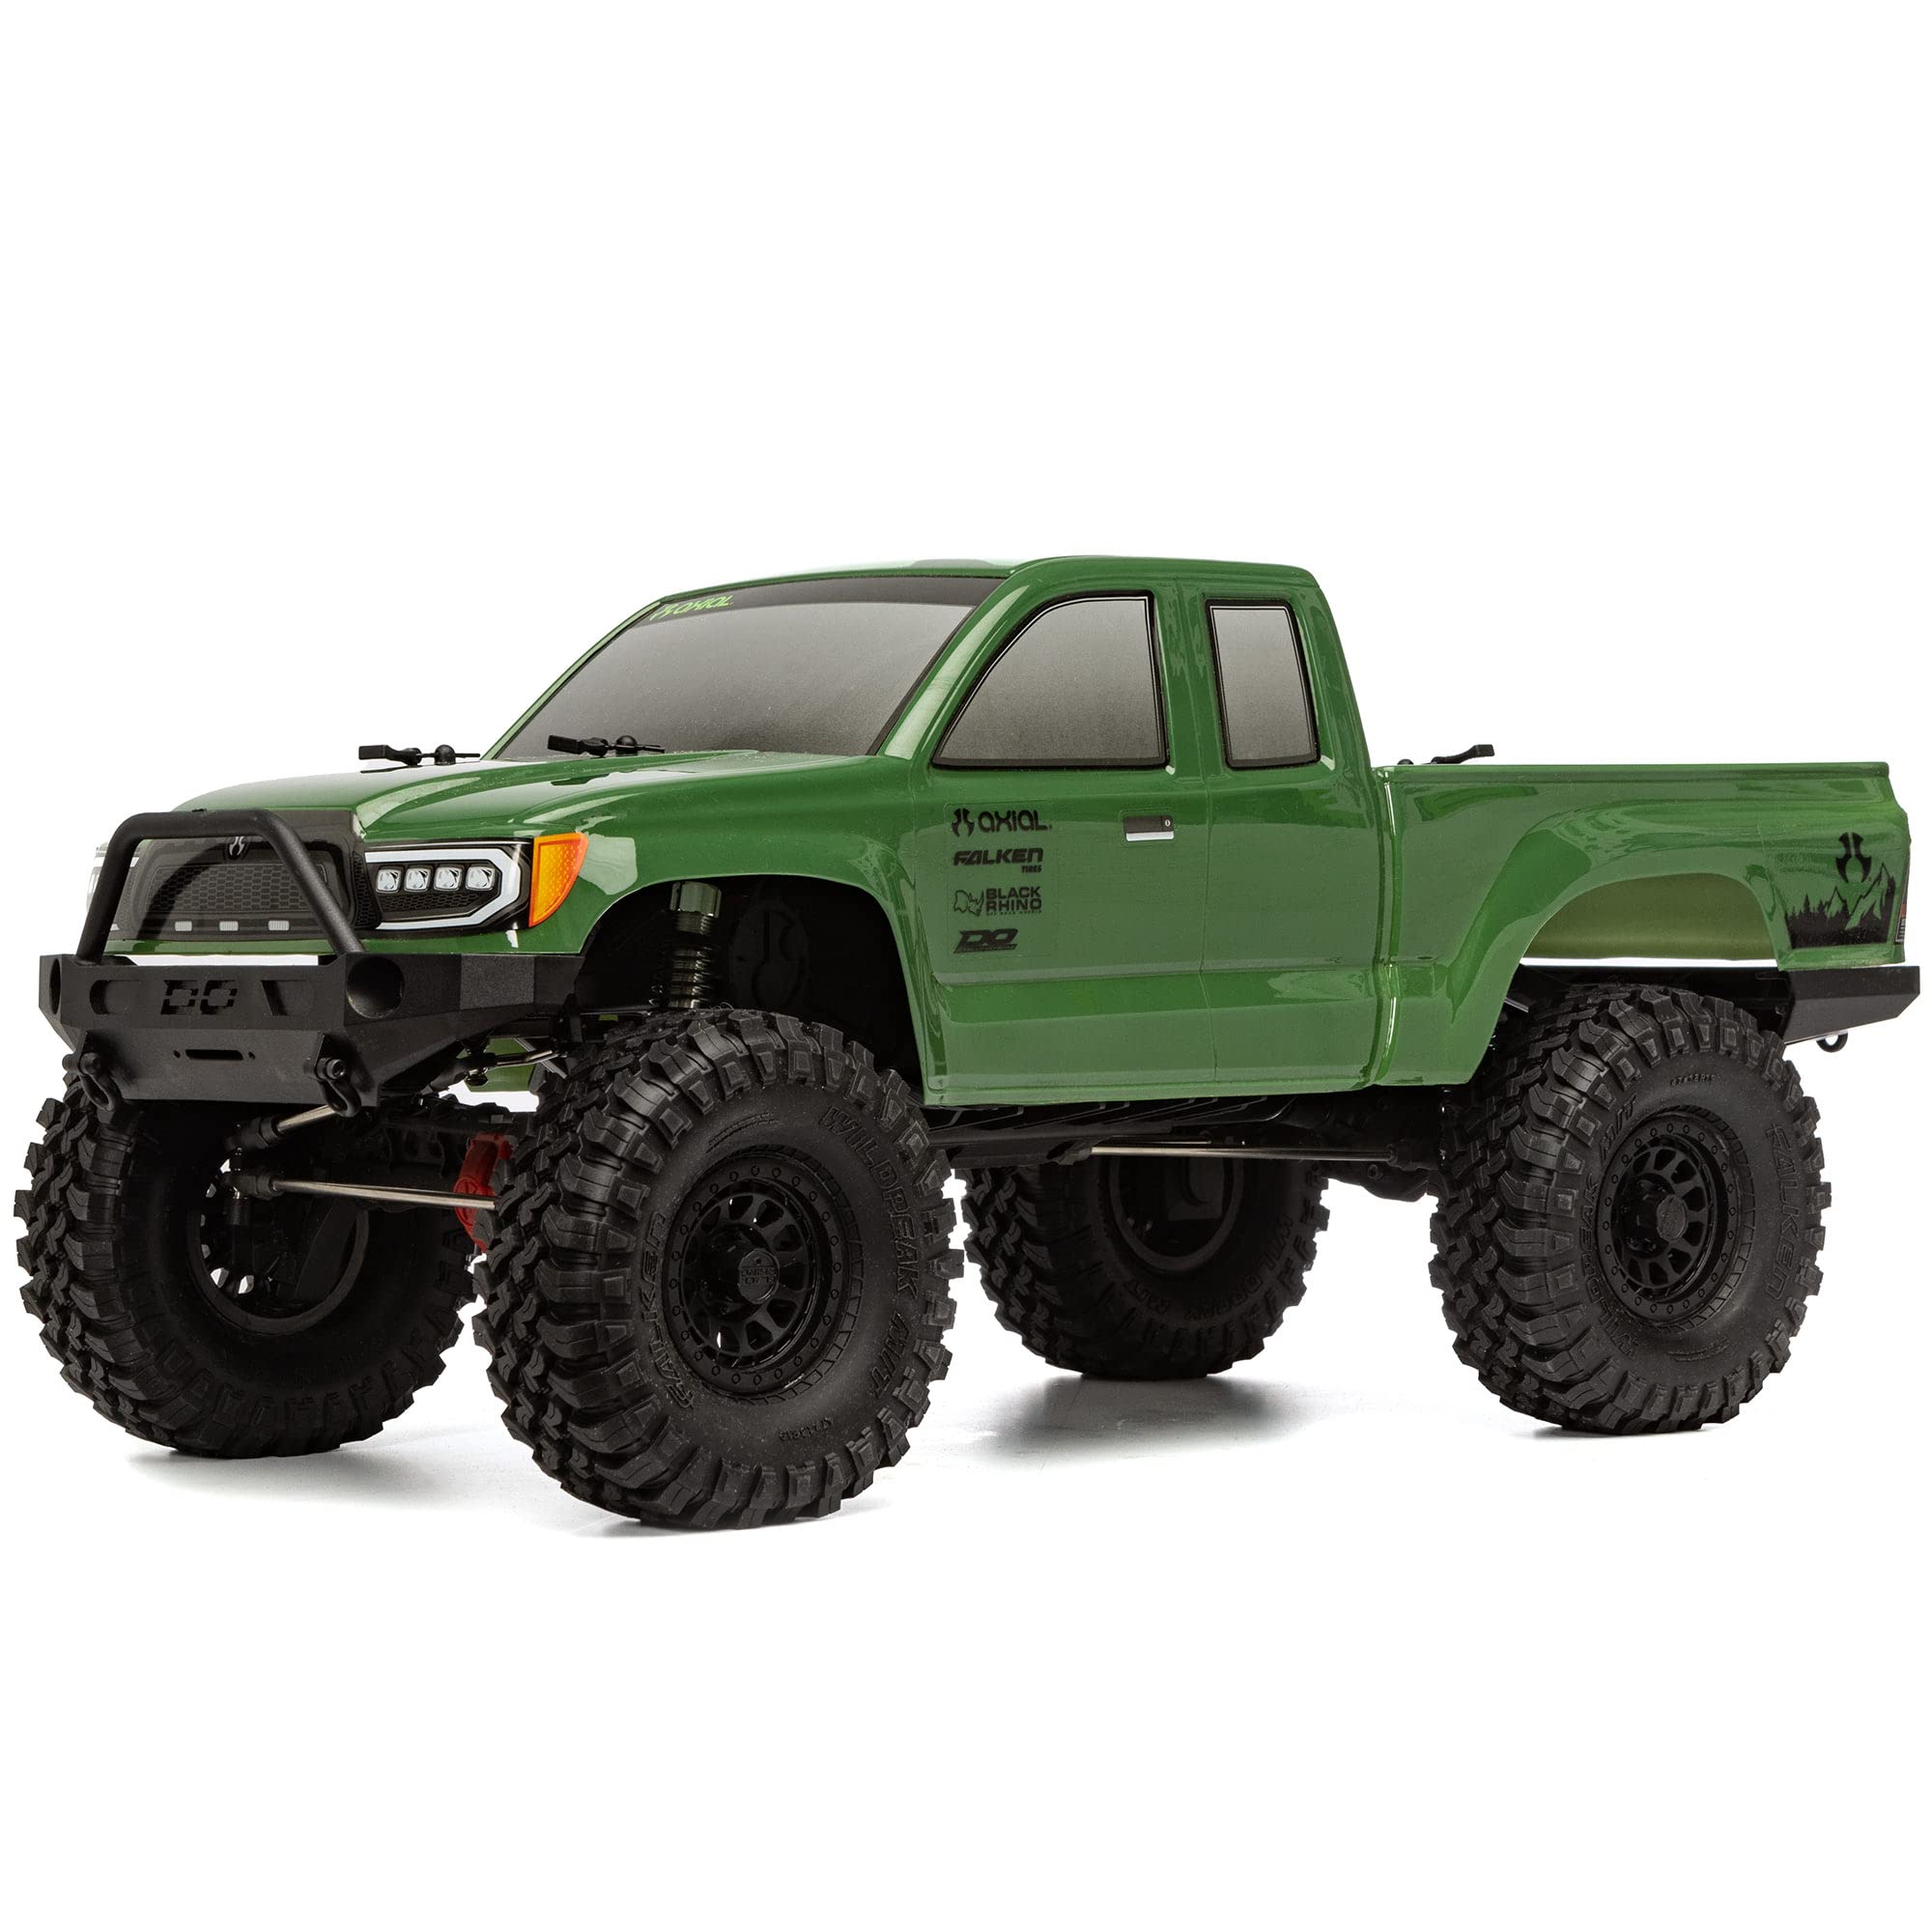 Axial RC Truck 1/10 SCX10 III Base Camp 4WD Rock Crawler Brushed RTR (Battery and Charger Not Included), Green, AXI03027T2